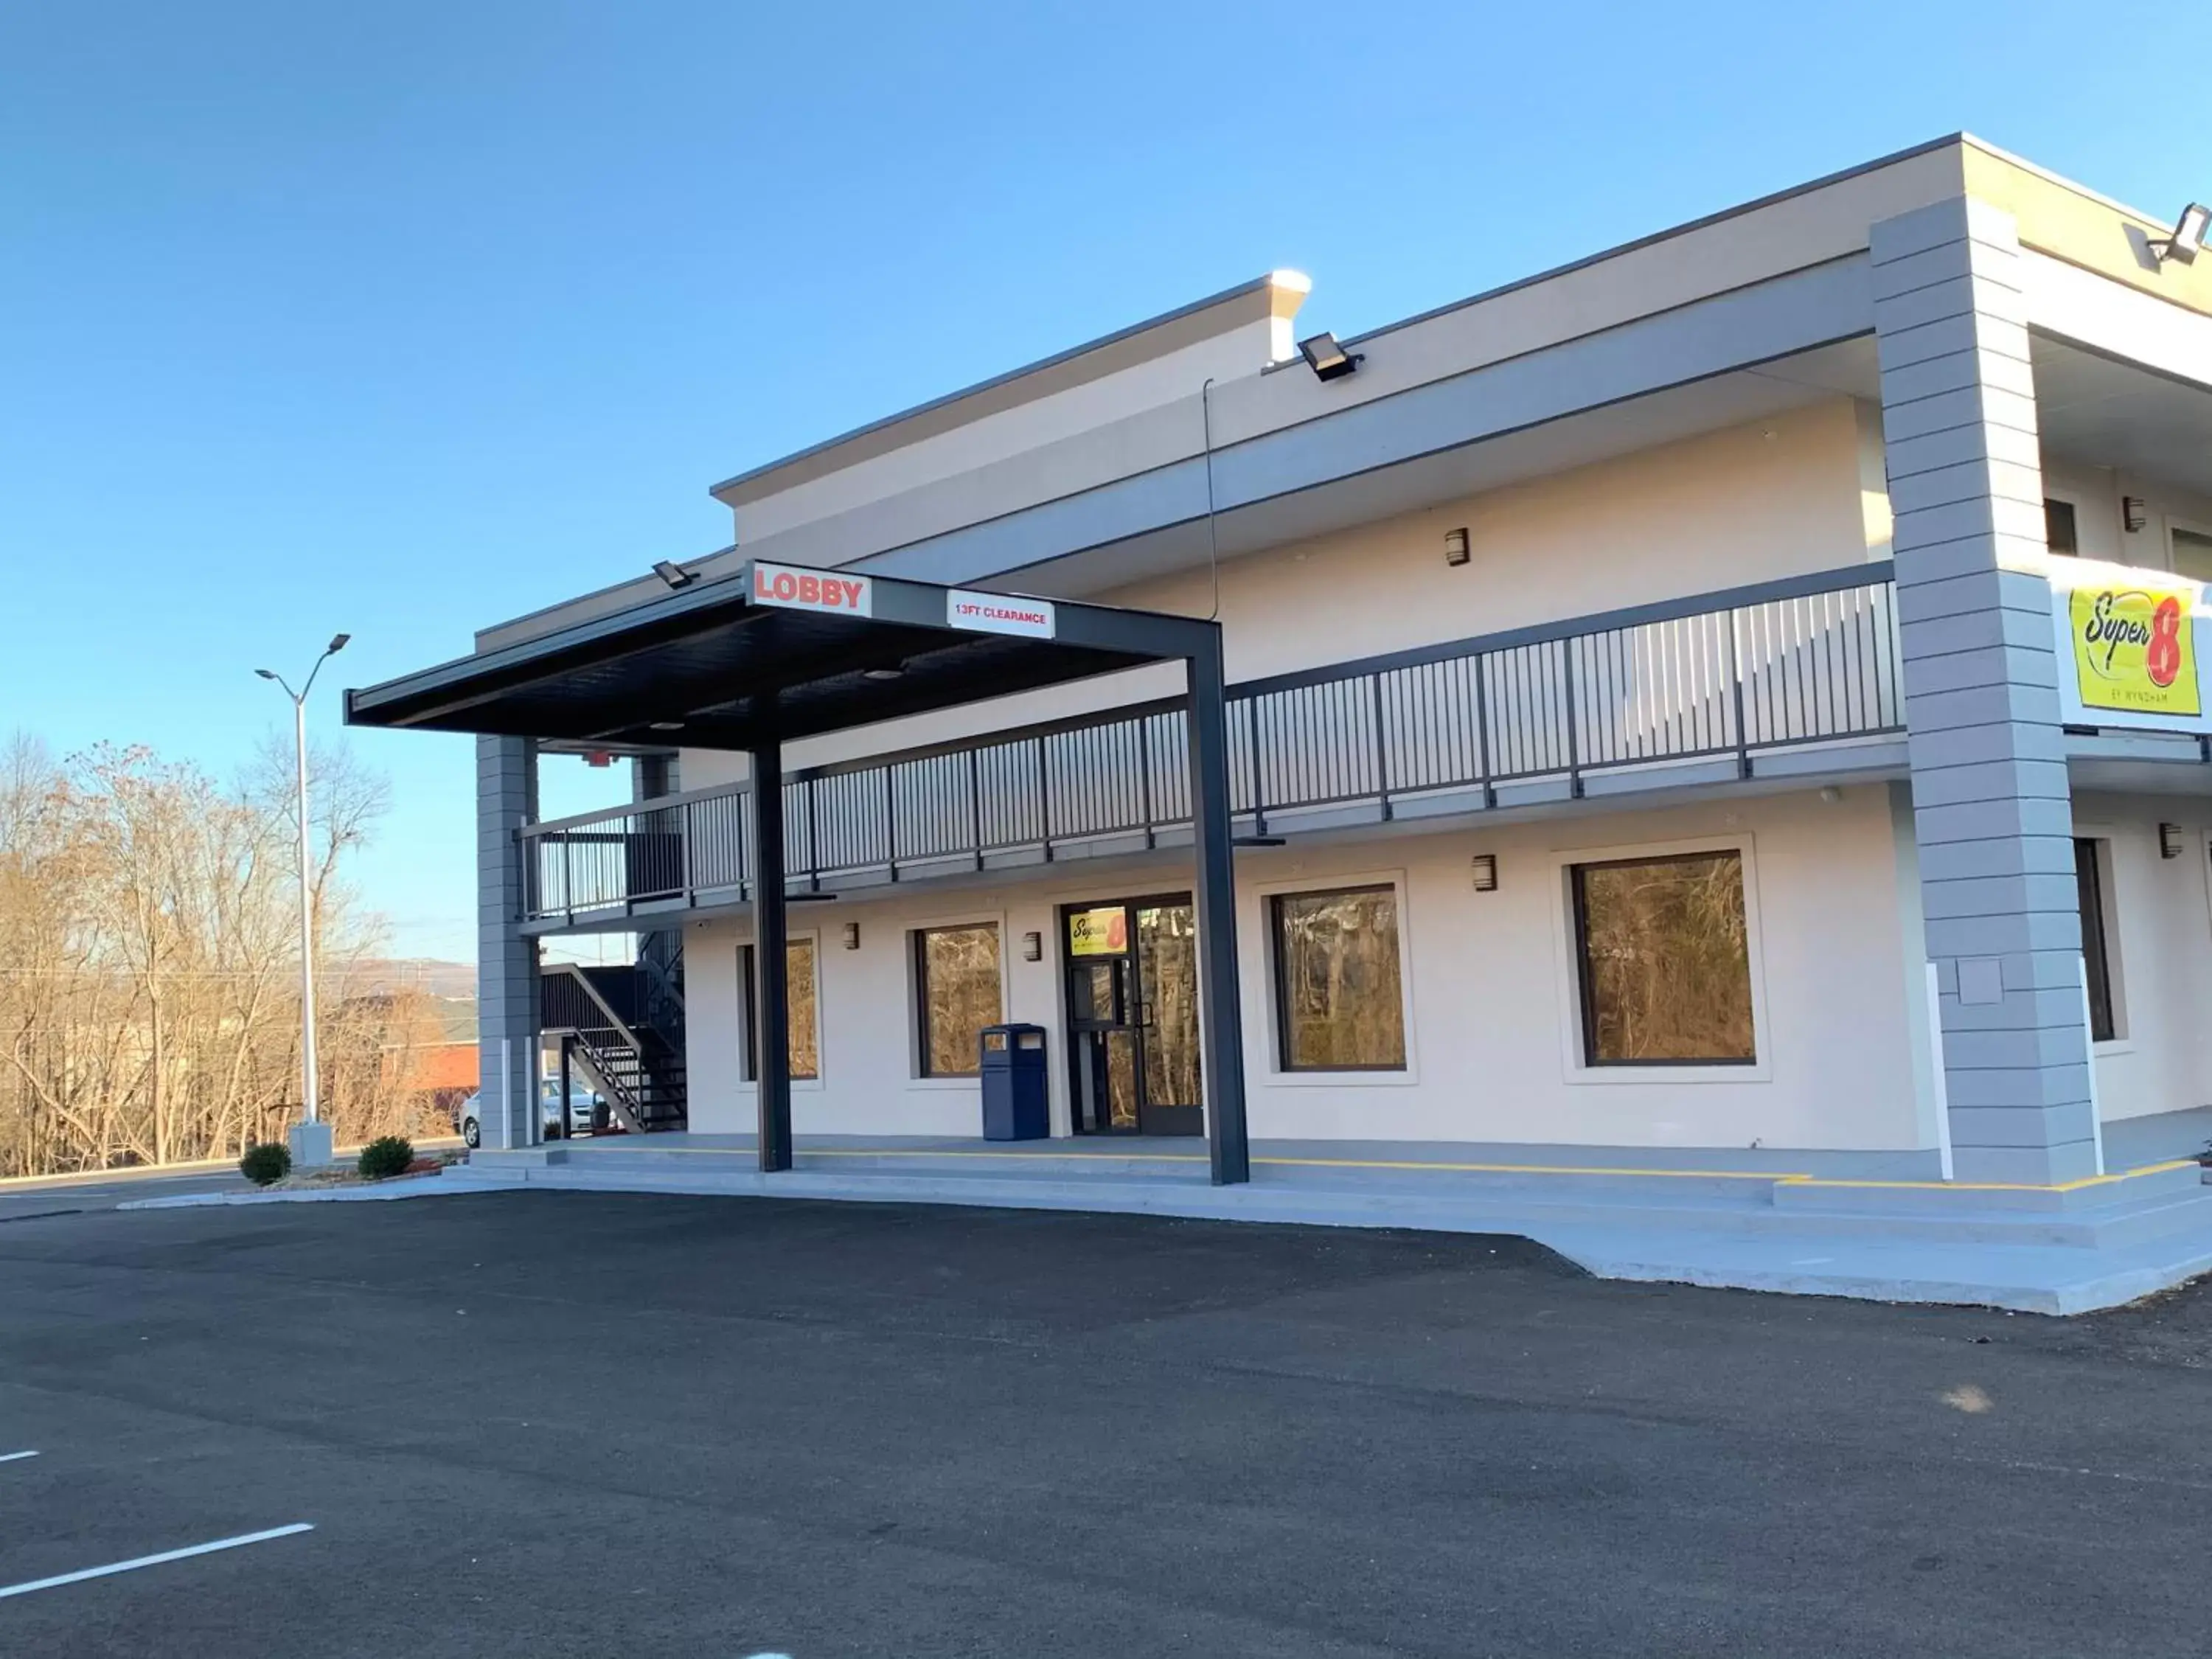 Property Building in Super 8 by Wyndham Cookeville, TN